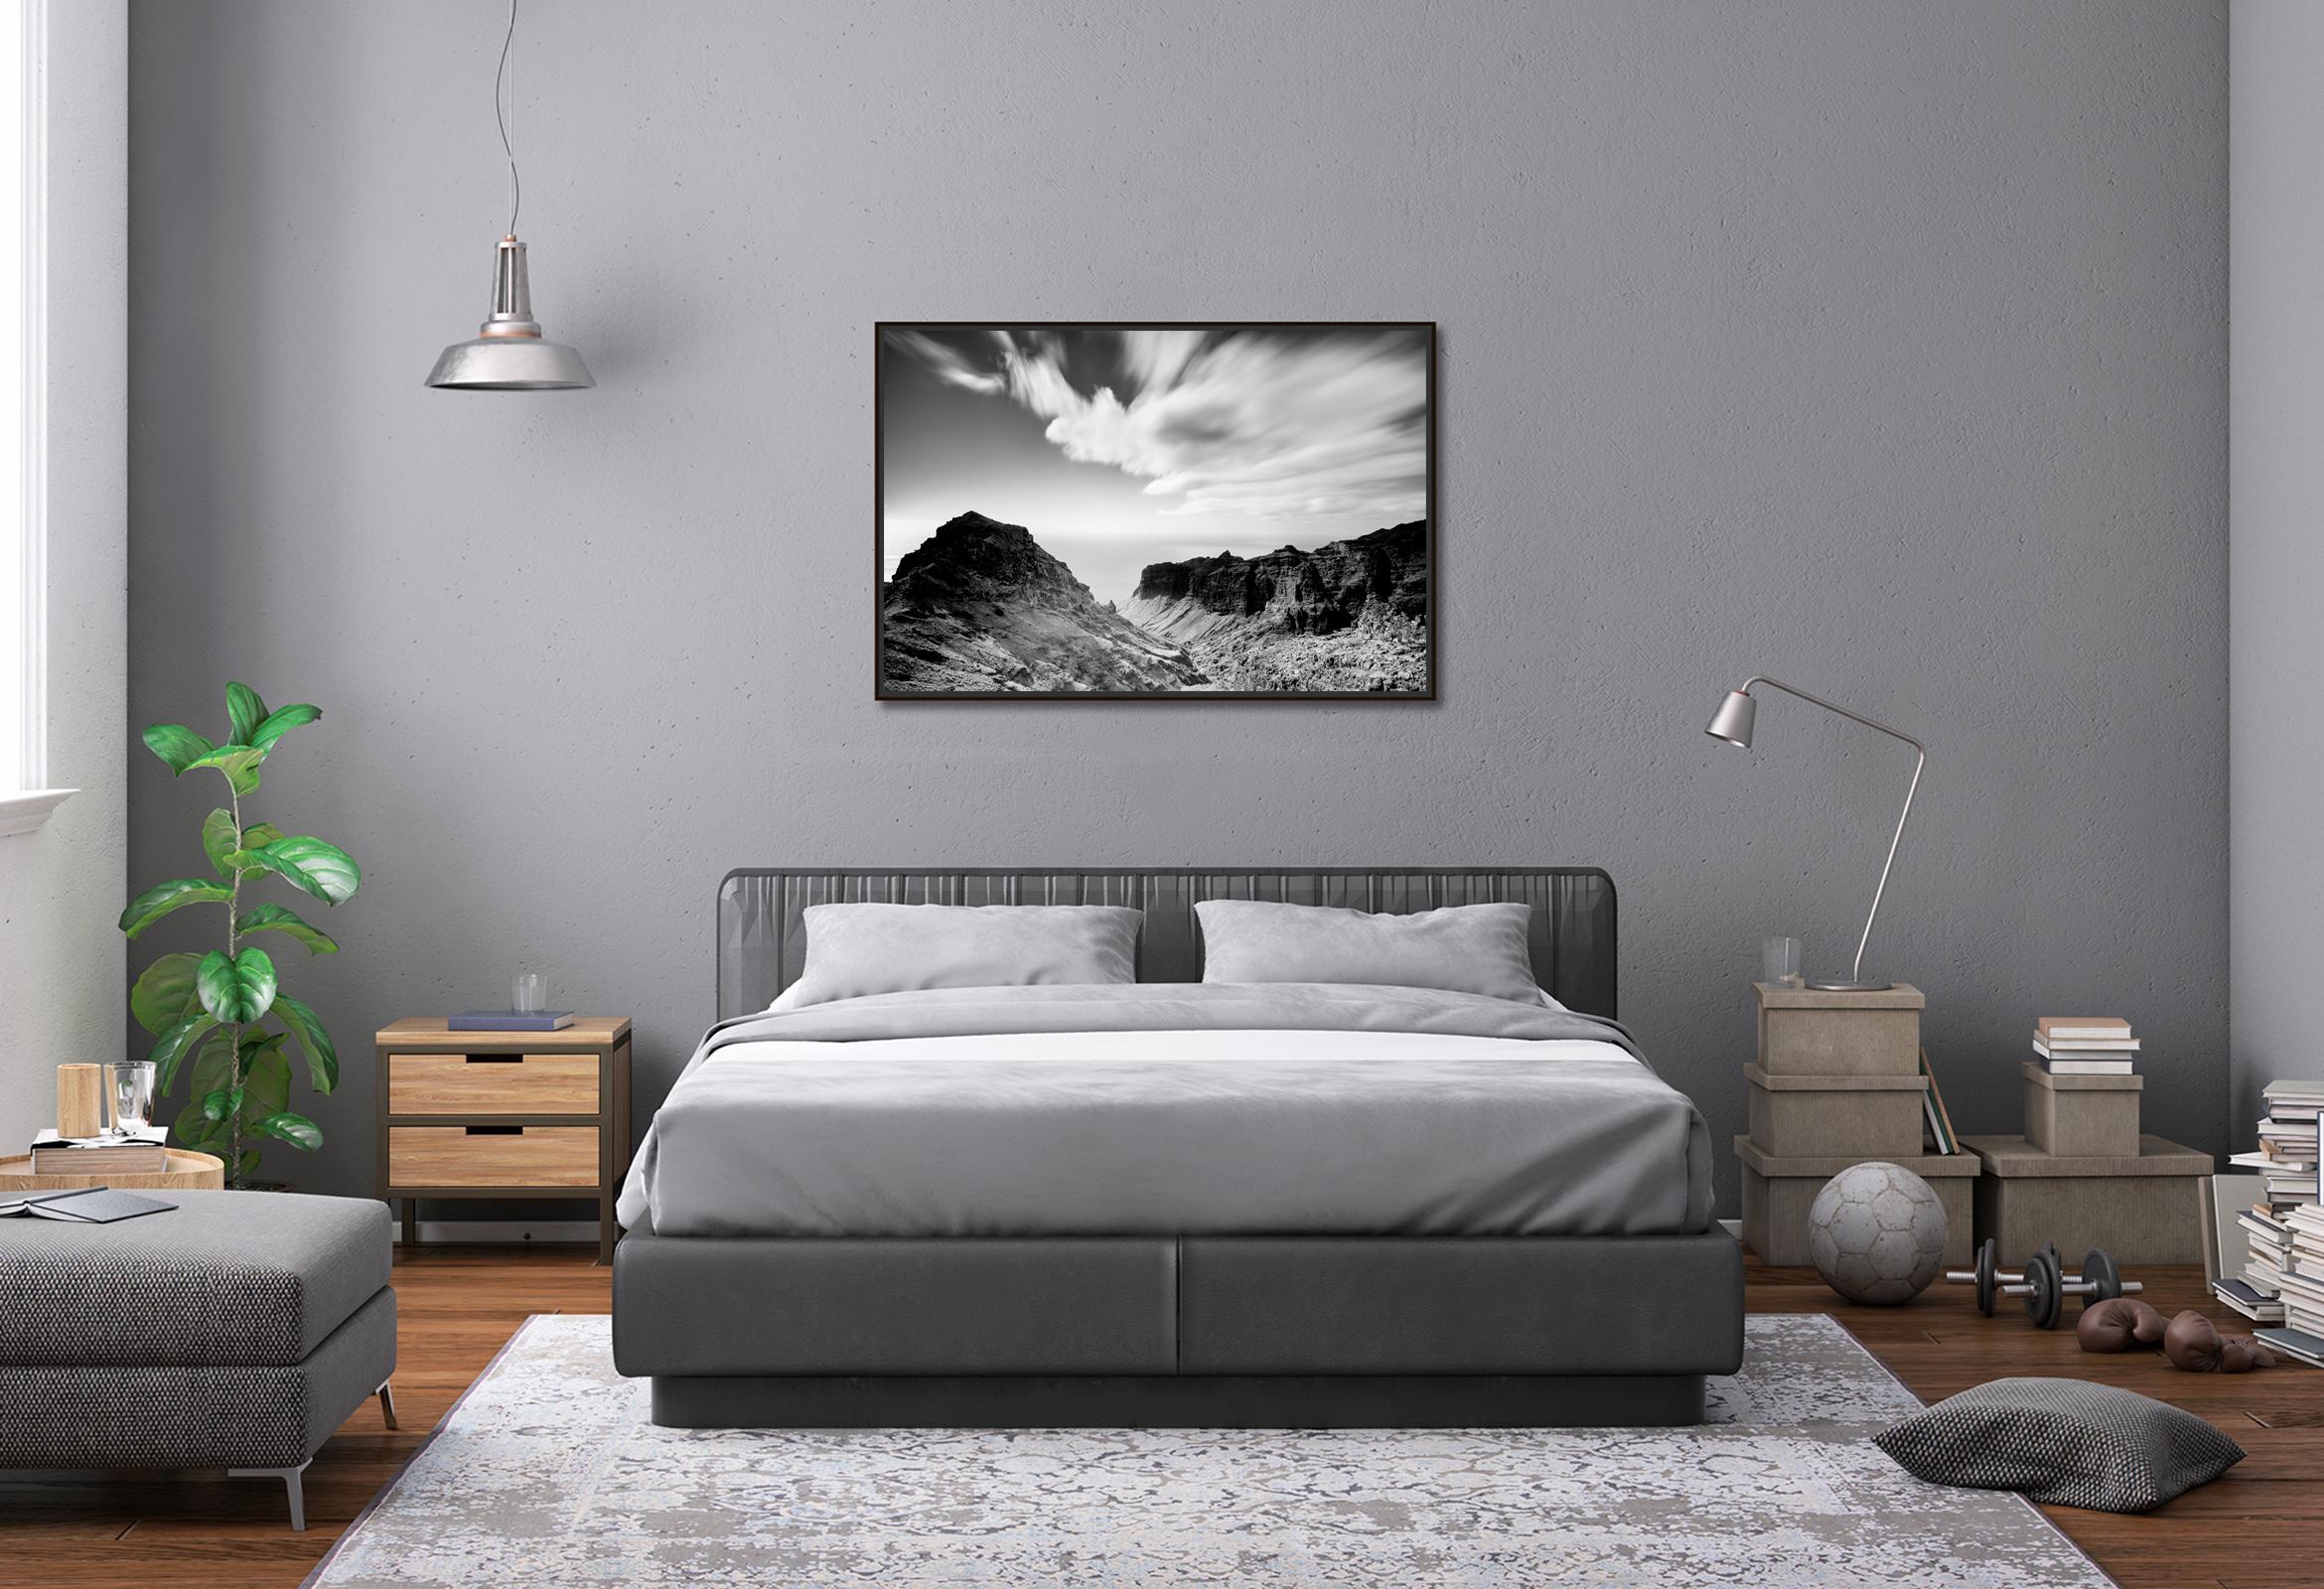 Black and white fine art long exposure waterscape - landscape photography. Archival pigment ink print as part of a limited edition of 7. All Gerald Berghammer prints are made to order in limited editions on Hahnemuehle Photo Rag Baryta. Each print